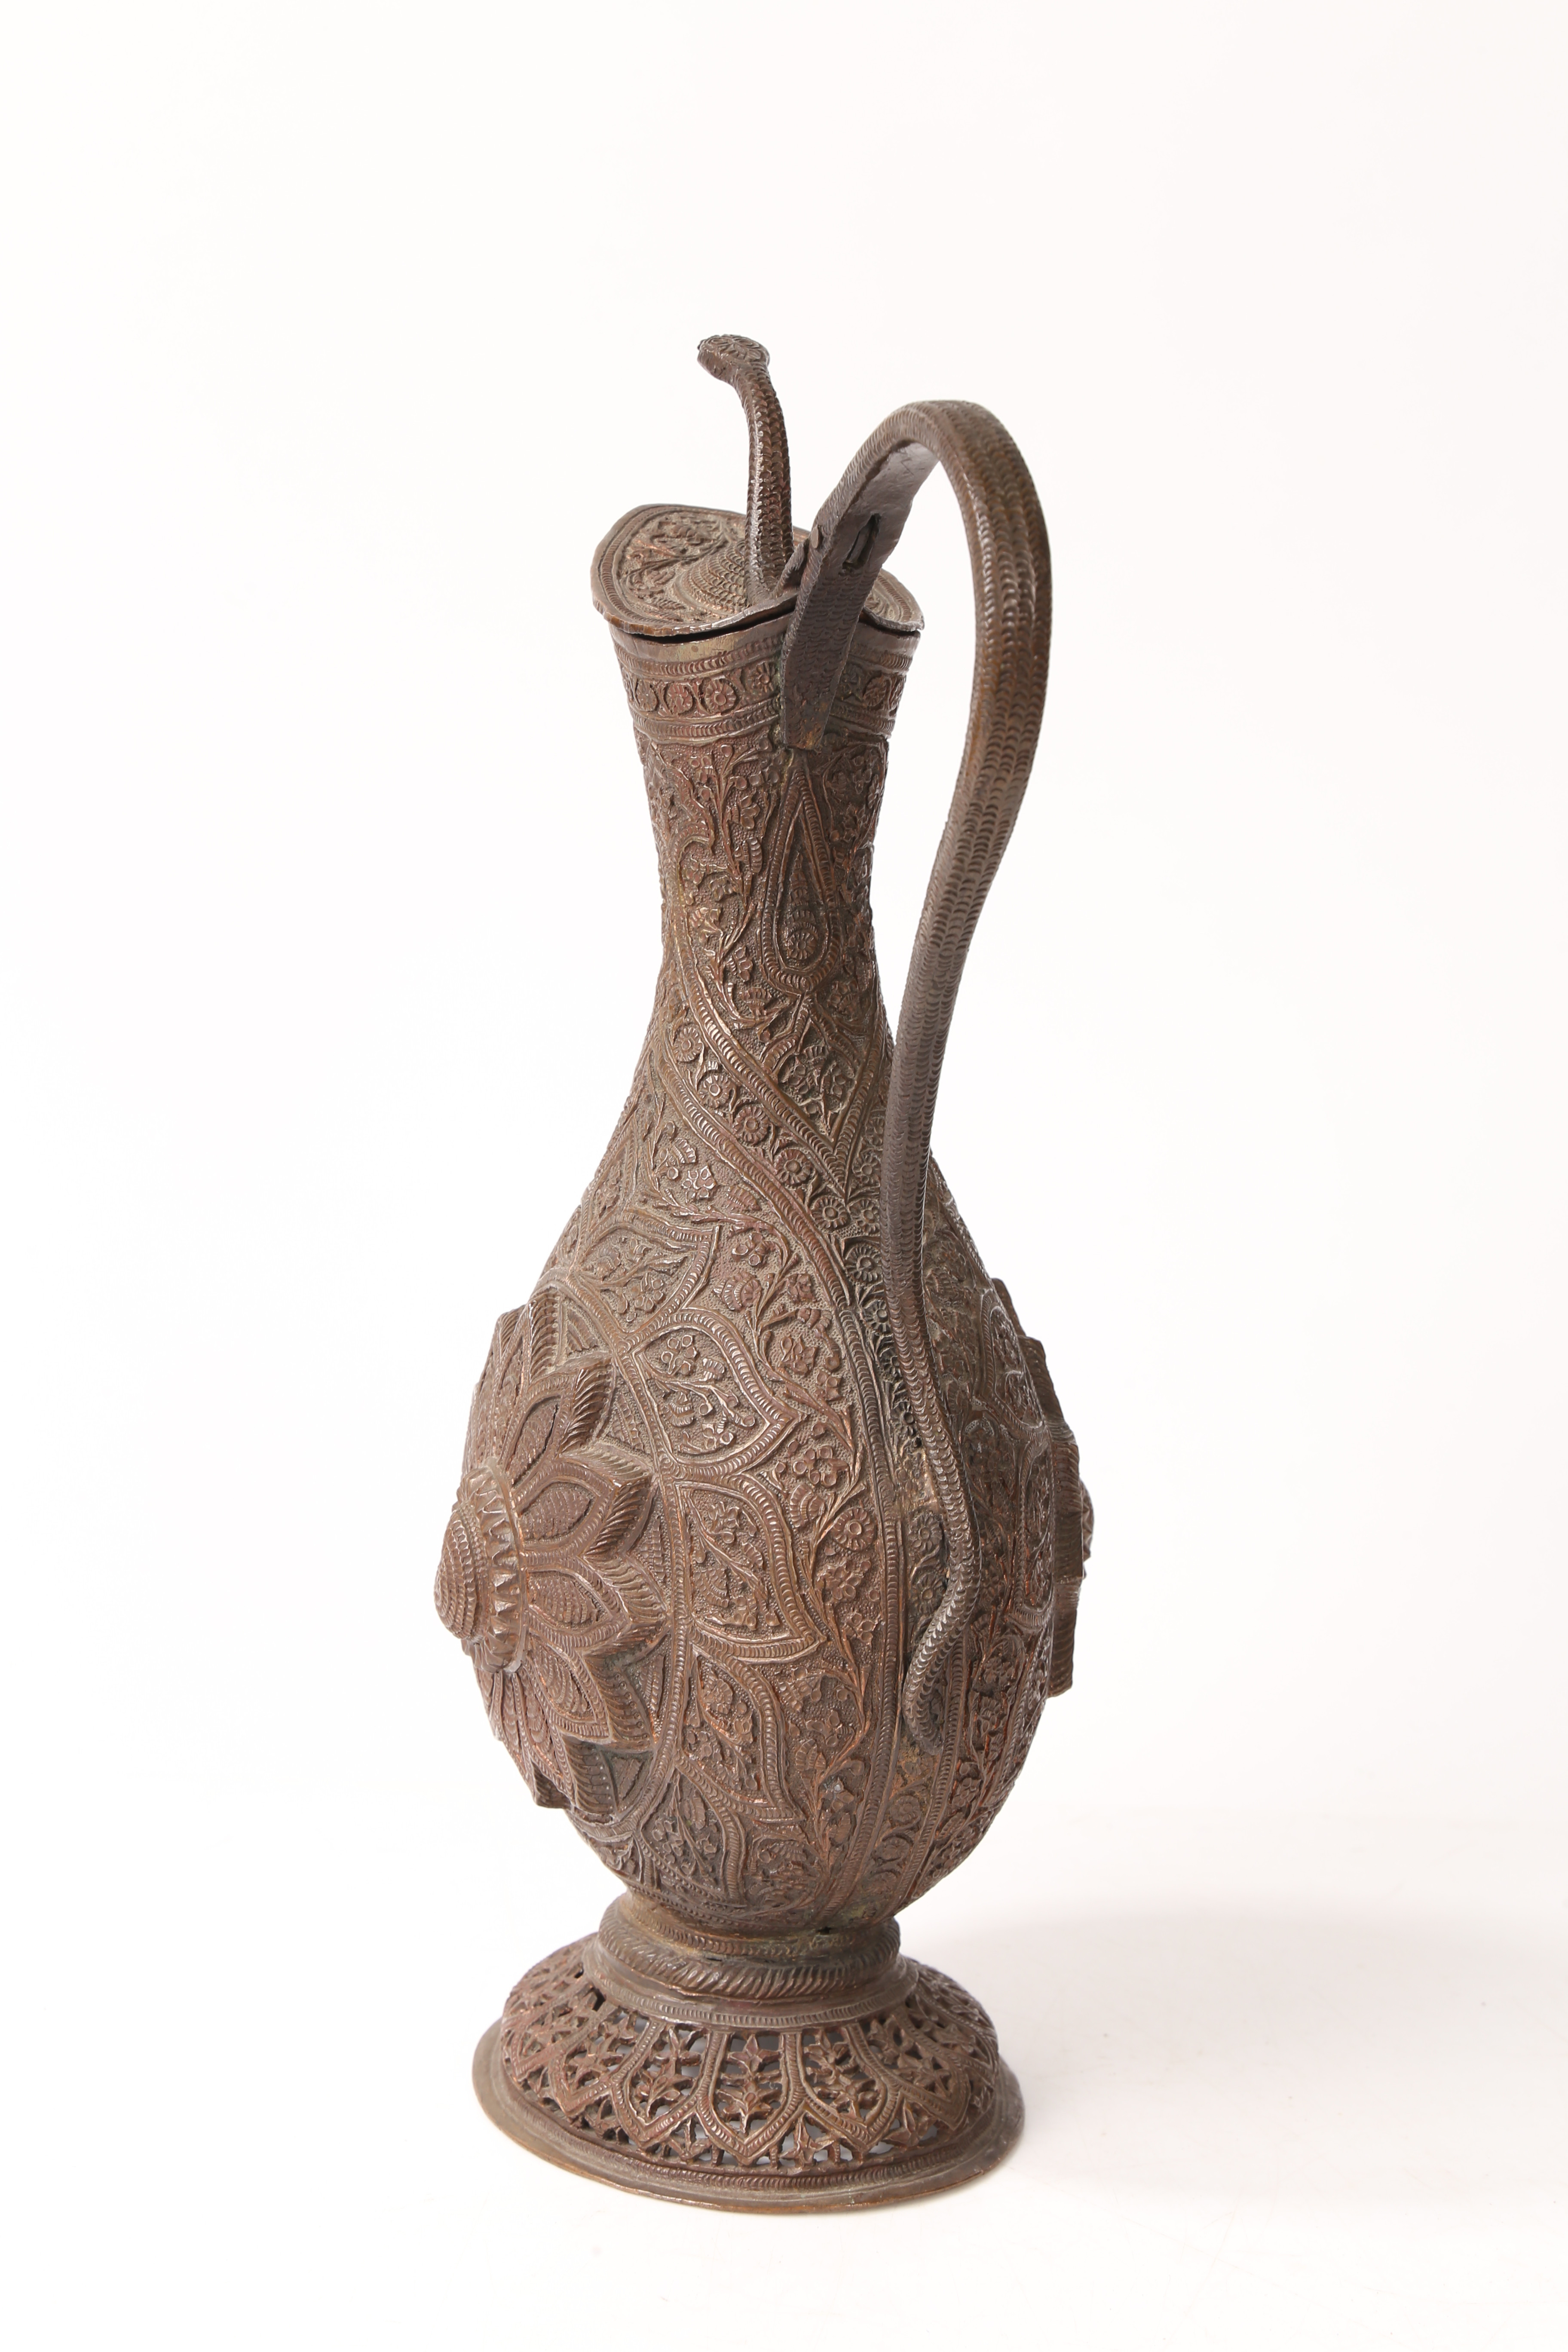 A 19TH CENTURY PERSIAN COPPER EWER. - Image 8 of 11